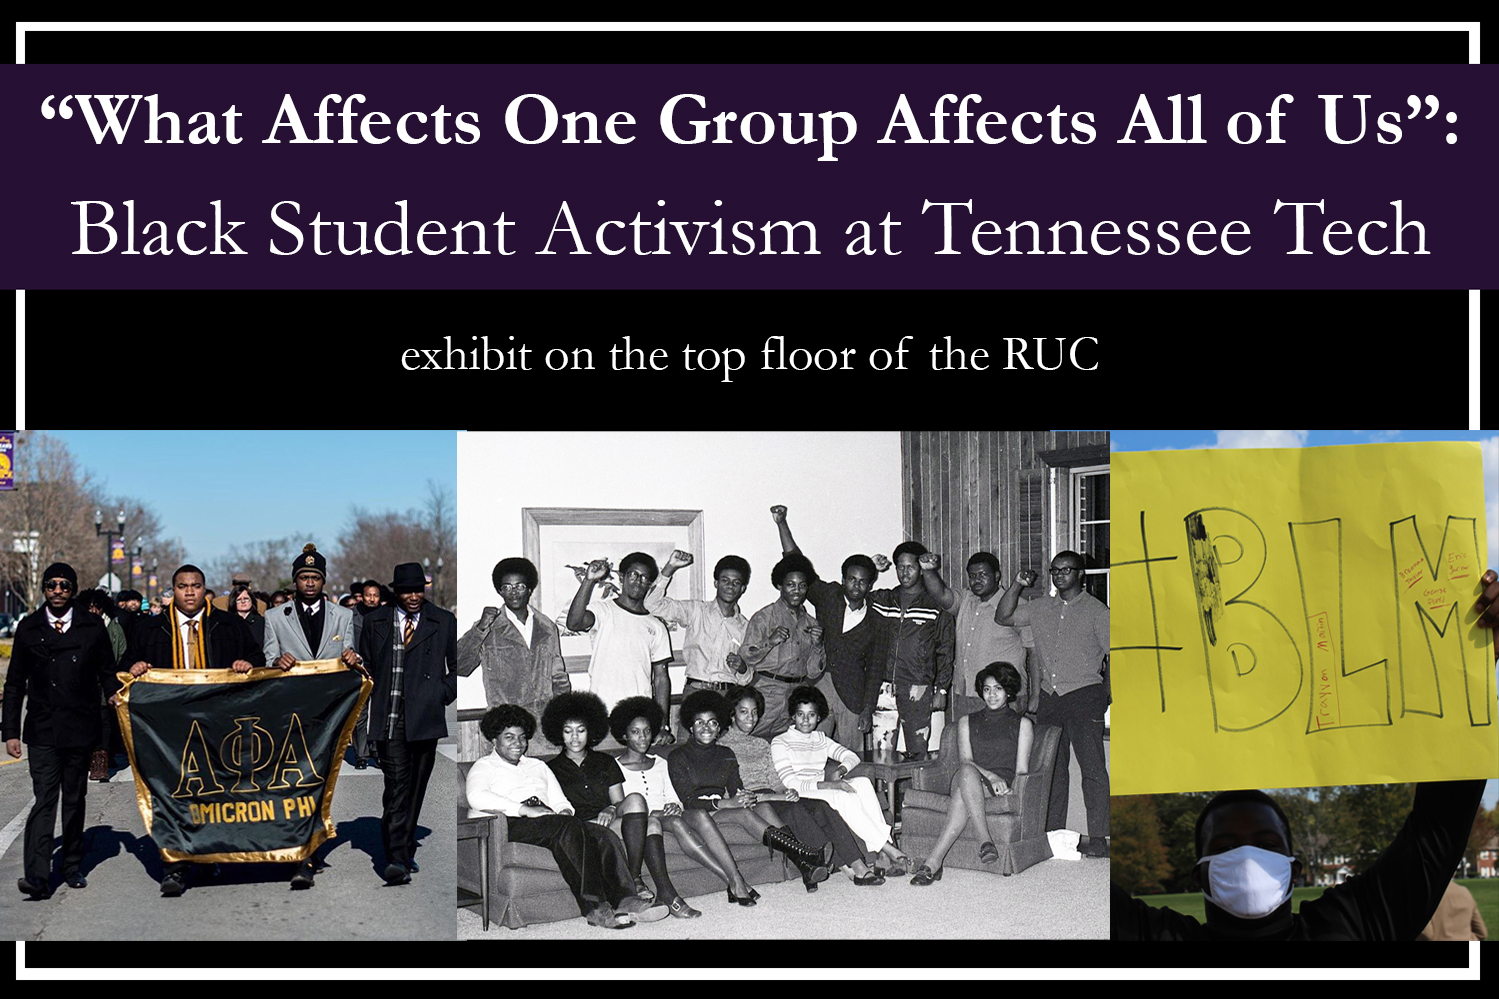 Black Student Activisim at Tennessee Tech flyer